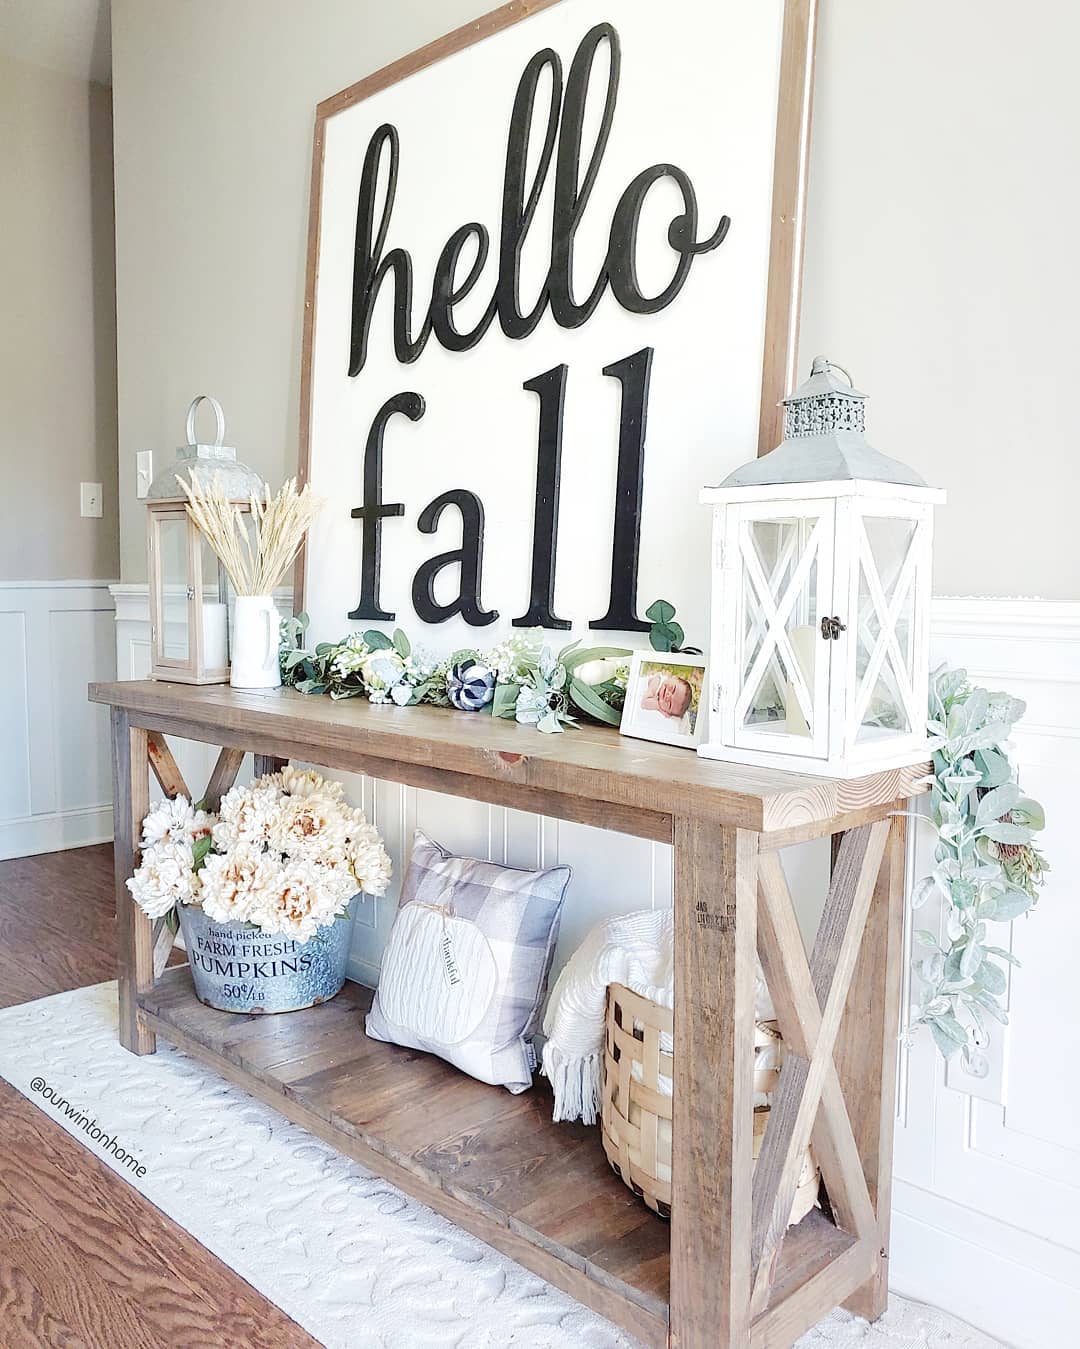 White sign on wood table in entryway.